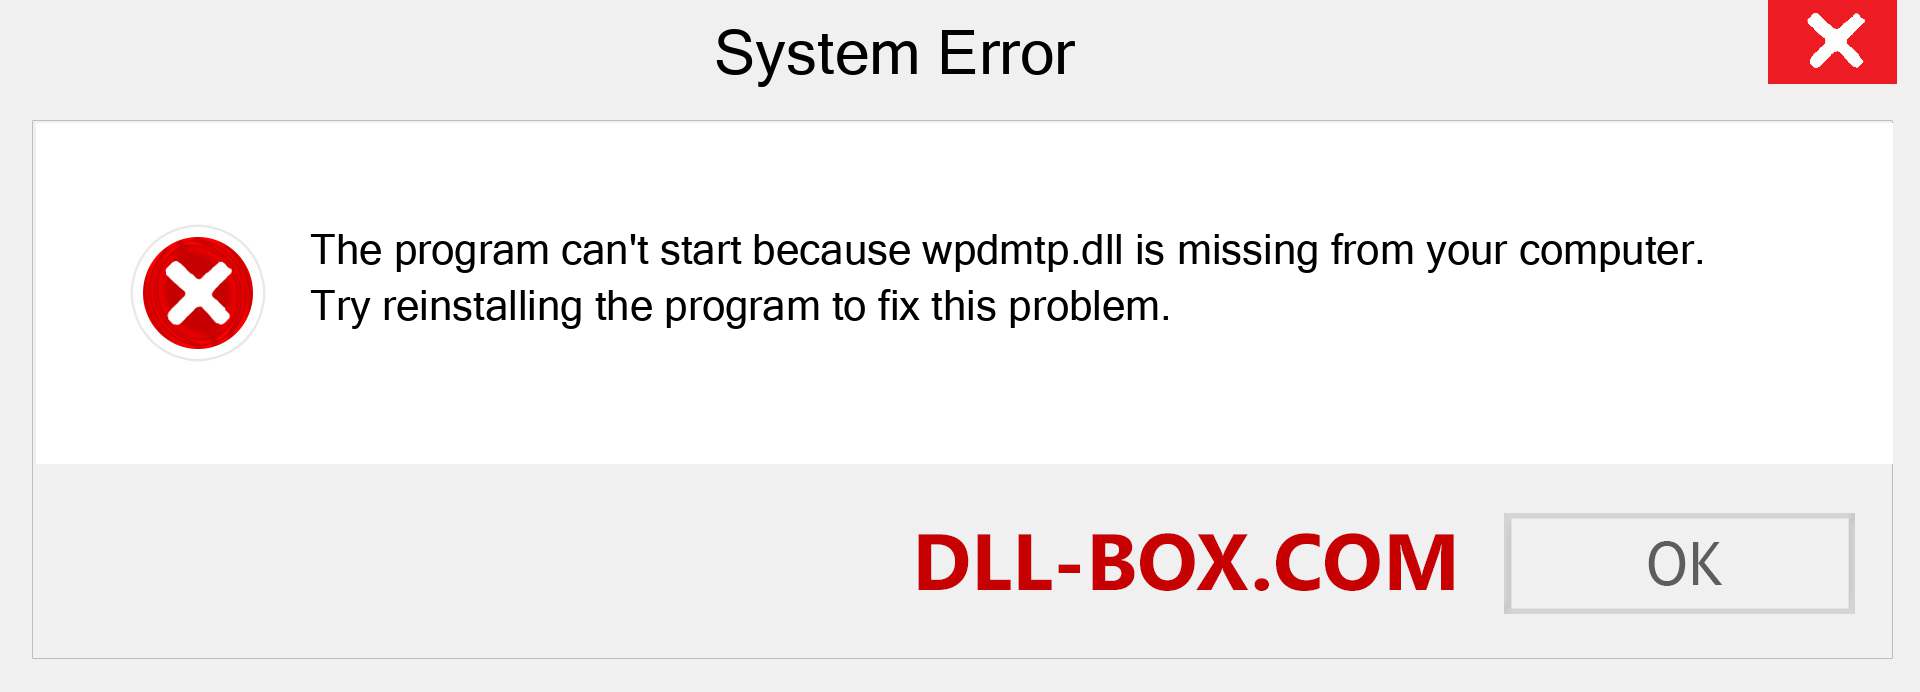  wpdmtp.dll file is missing?. Download for Windows 7, 8, 10 - Fix  wpdmtp dll Missing Error on Windows, photos, images